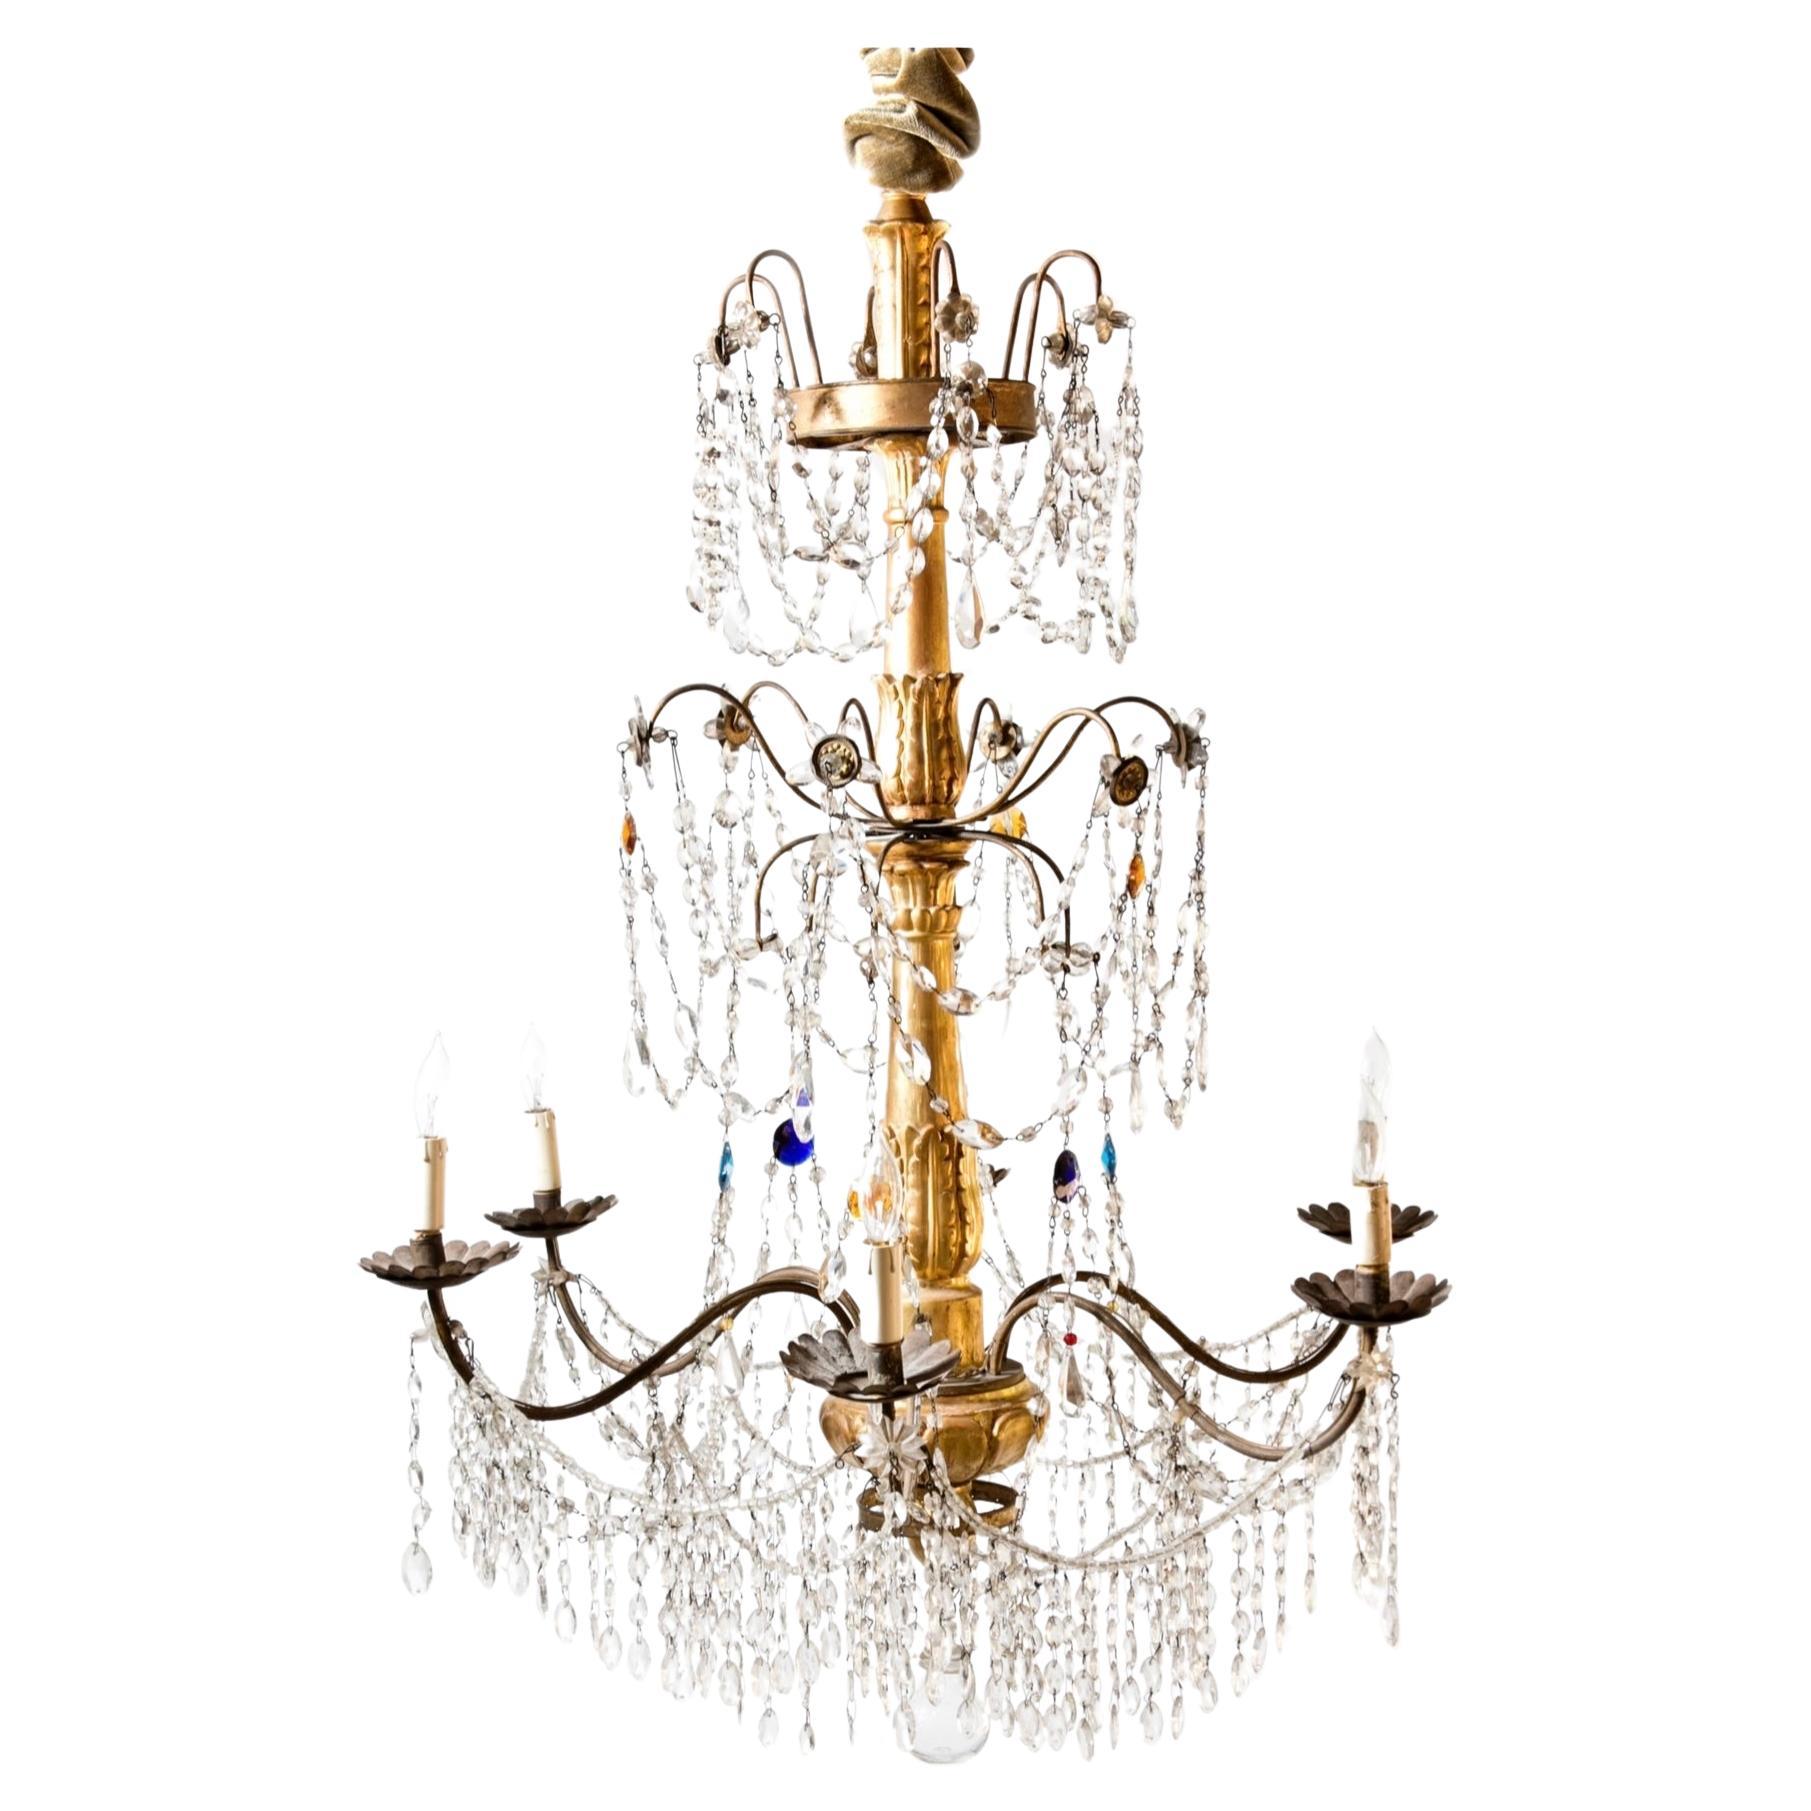  Important Late 18th c  Genovese Chandelier  For Sale